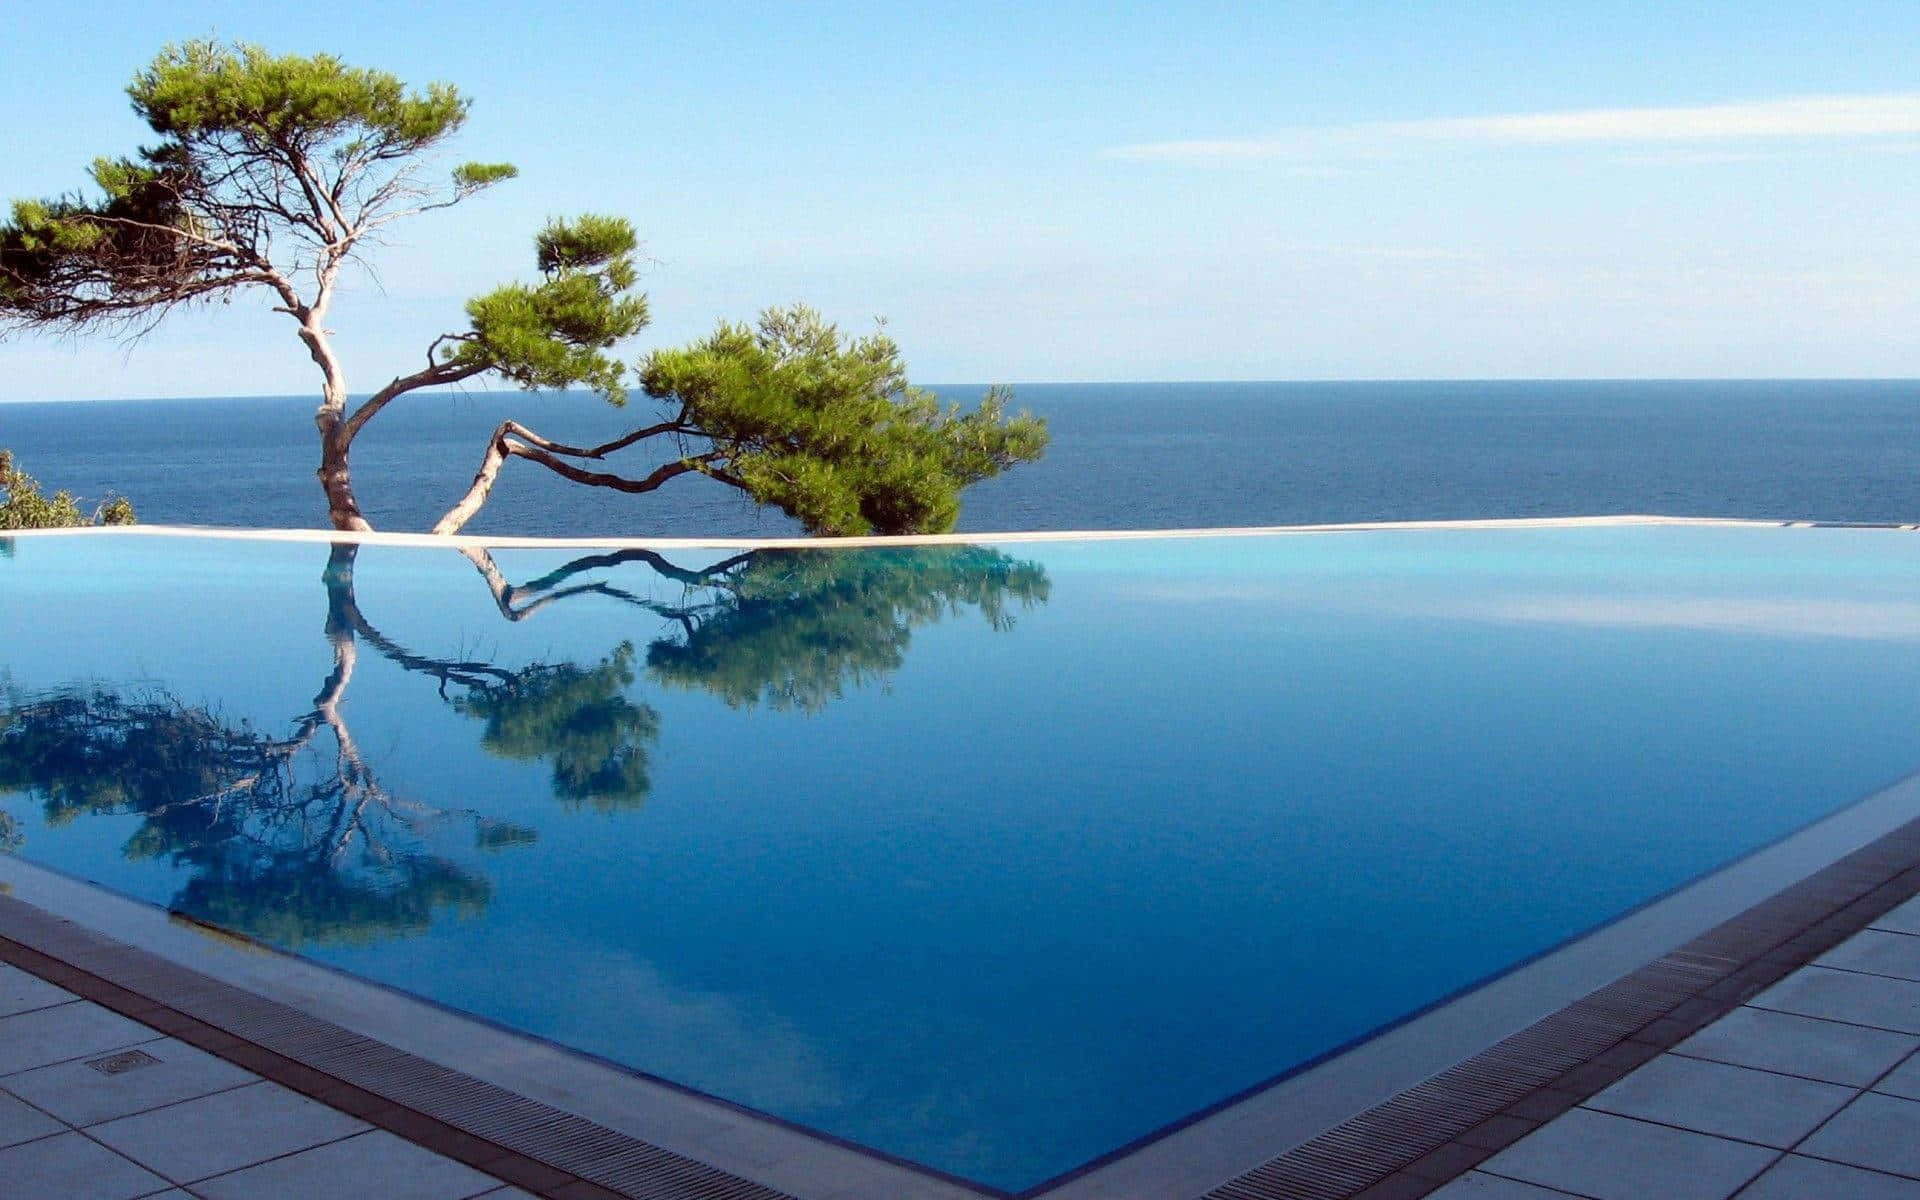 Refresh and re-energize in a sparkling swimming pool